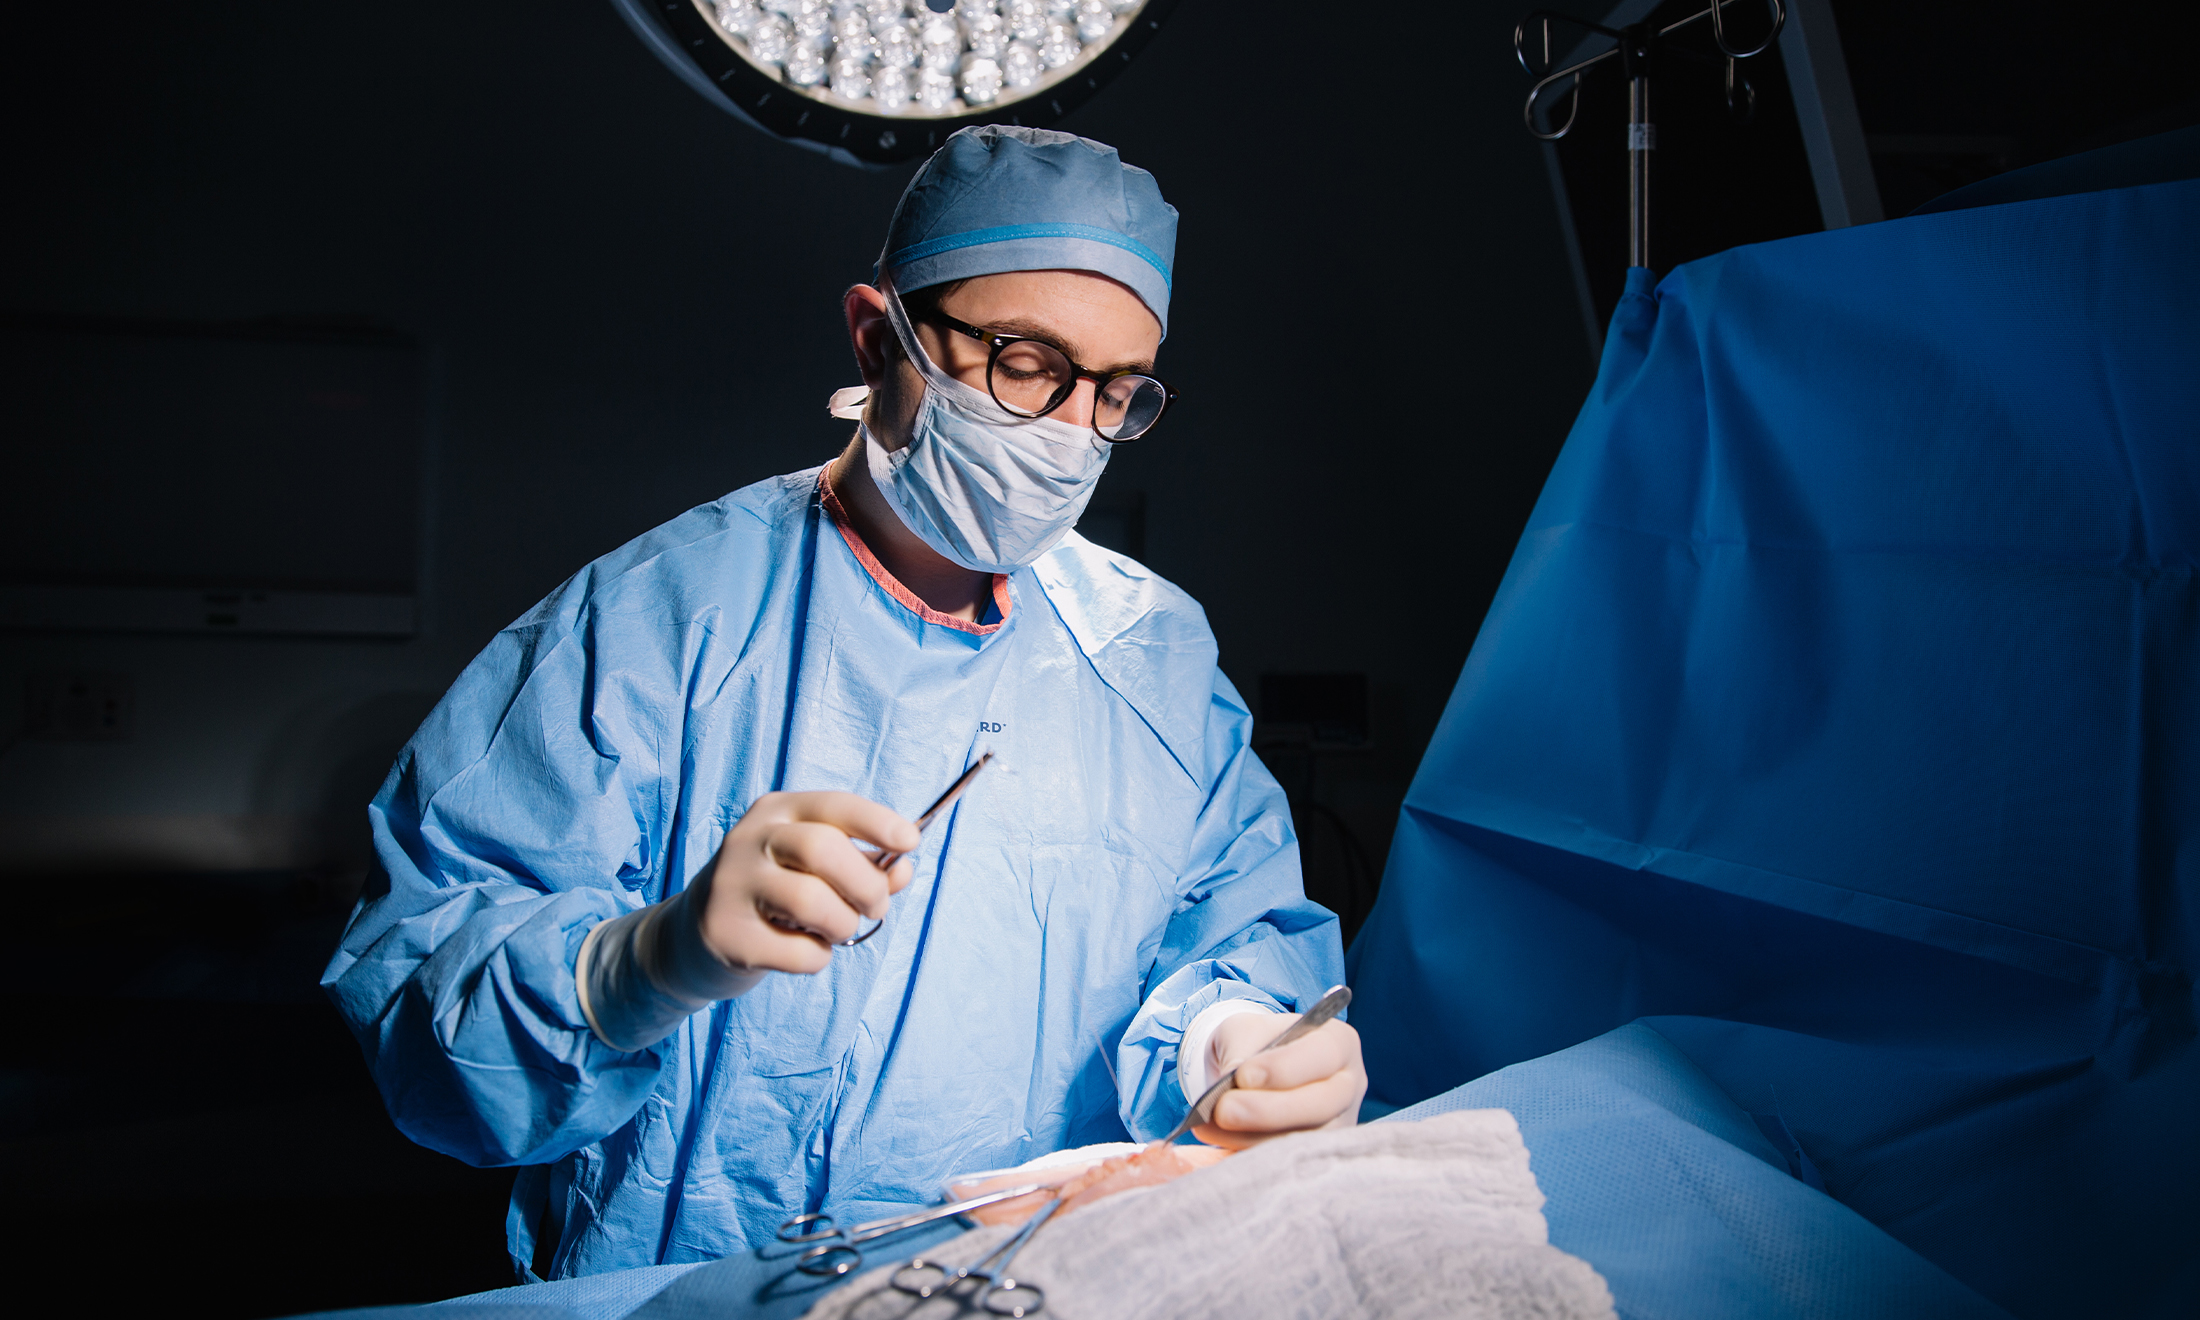 An image of a doctor in an operating room